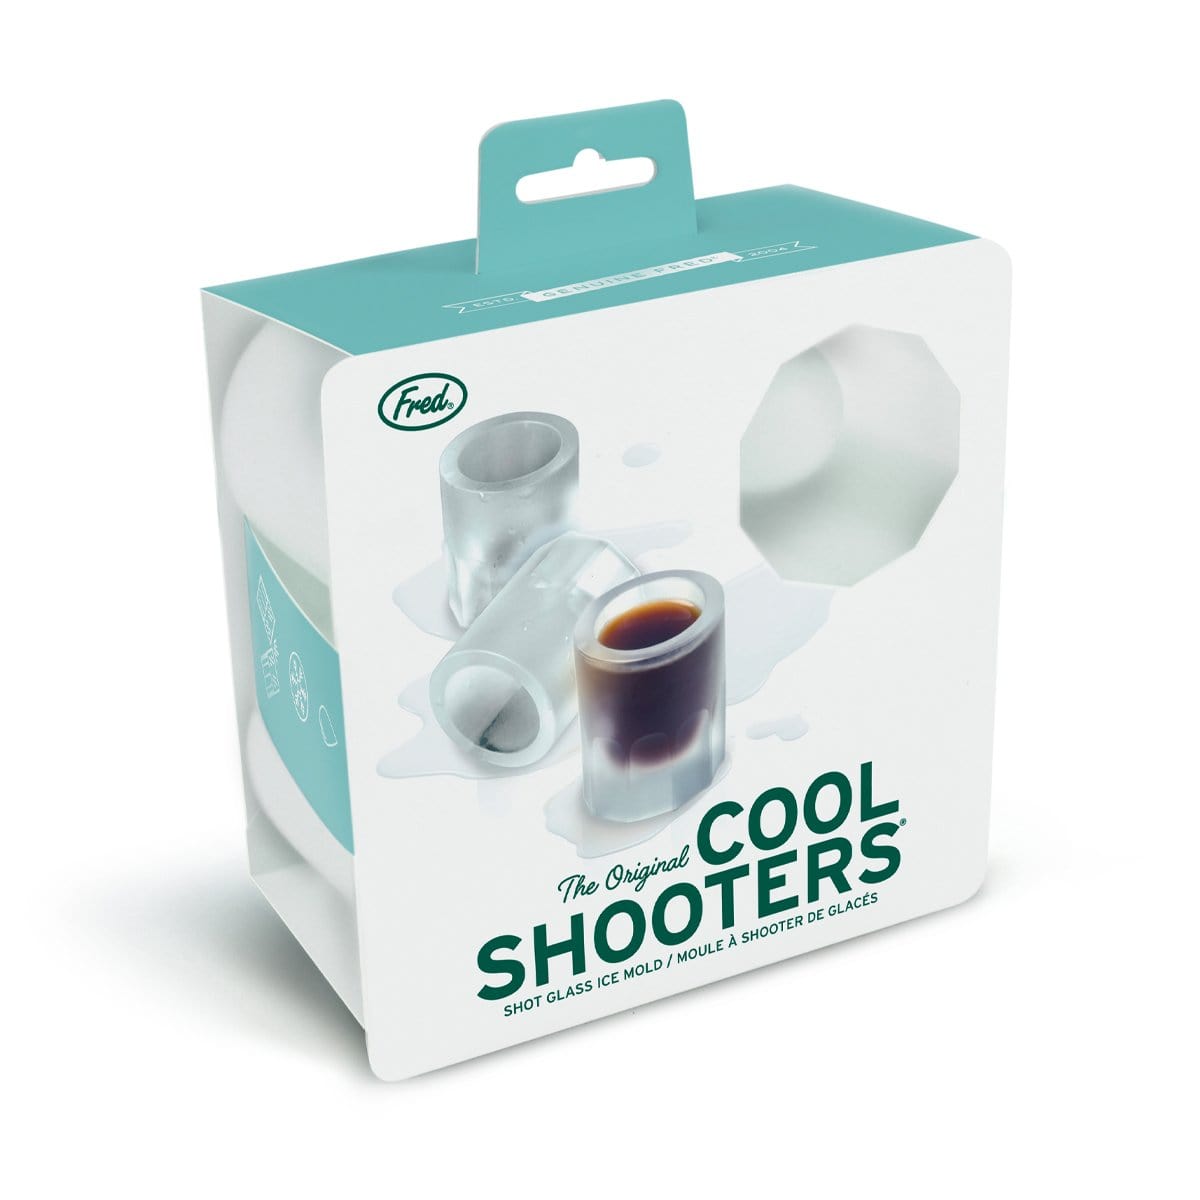 FRED Cool Shooters shot glass ice mould tray BNIB Make ice shot